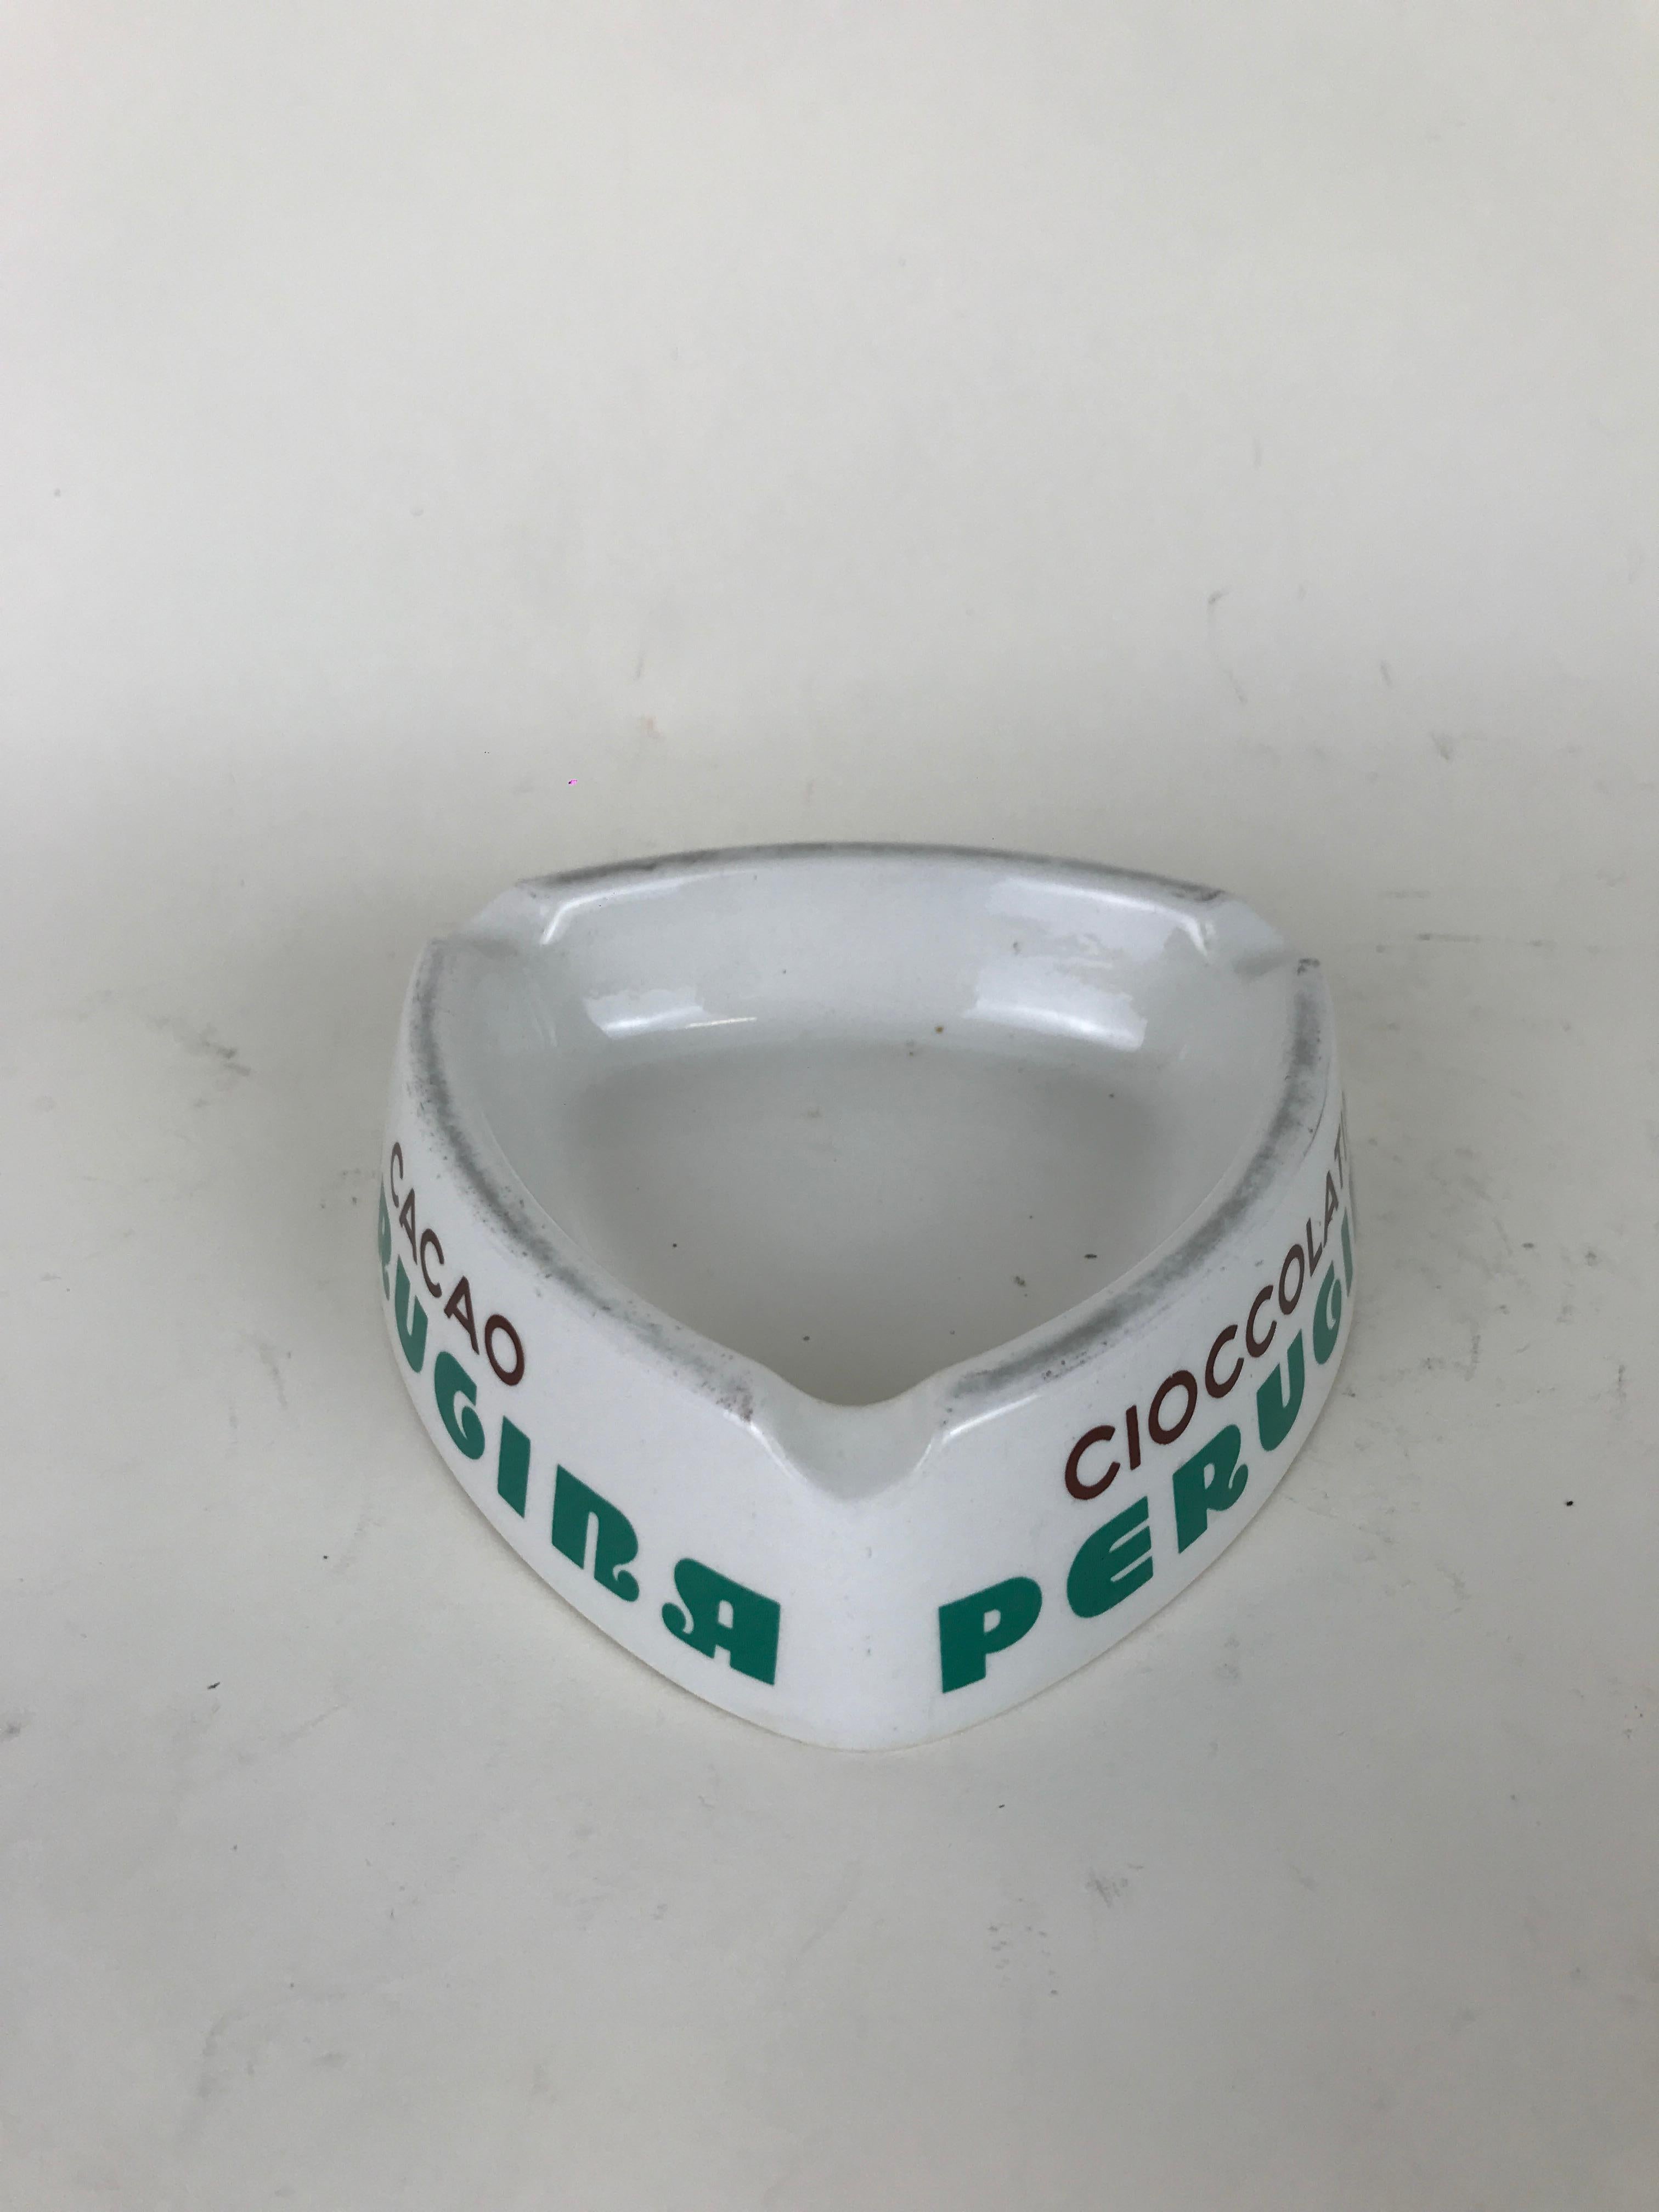 1950s Italian vintage advertising white triangular ashtray with Perugina logo in green on all three sides.
Each side also has a specialty product by the company: 